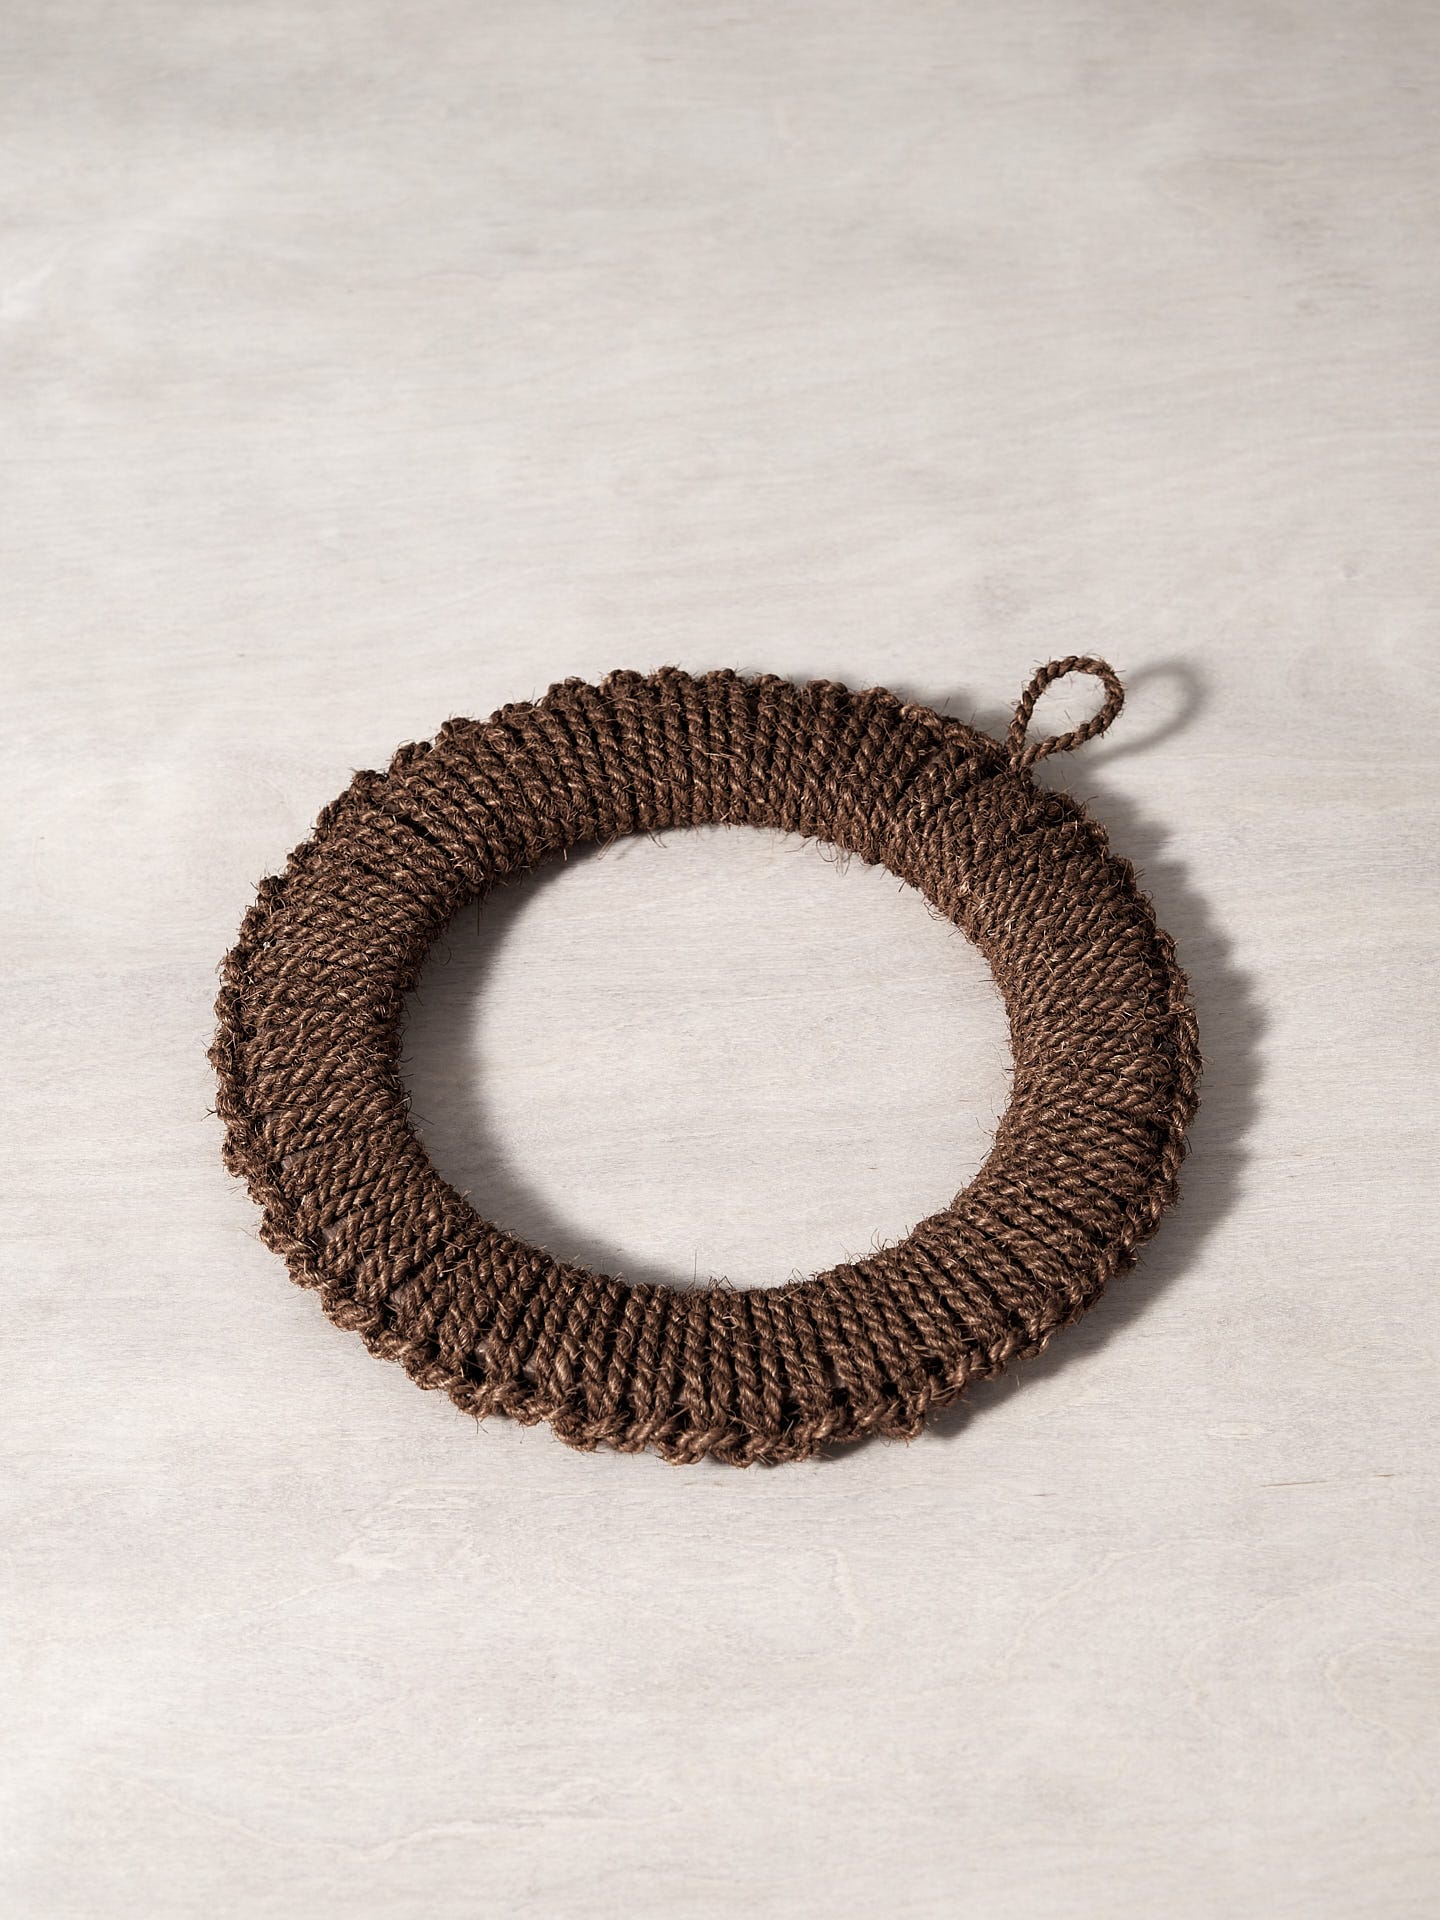 A Takada Hand-Knit Trivet – Large on a wooden surface.